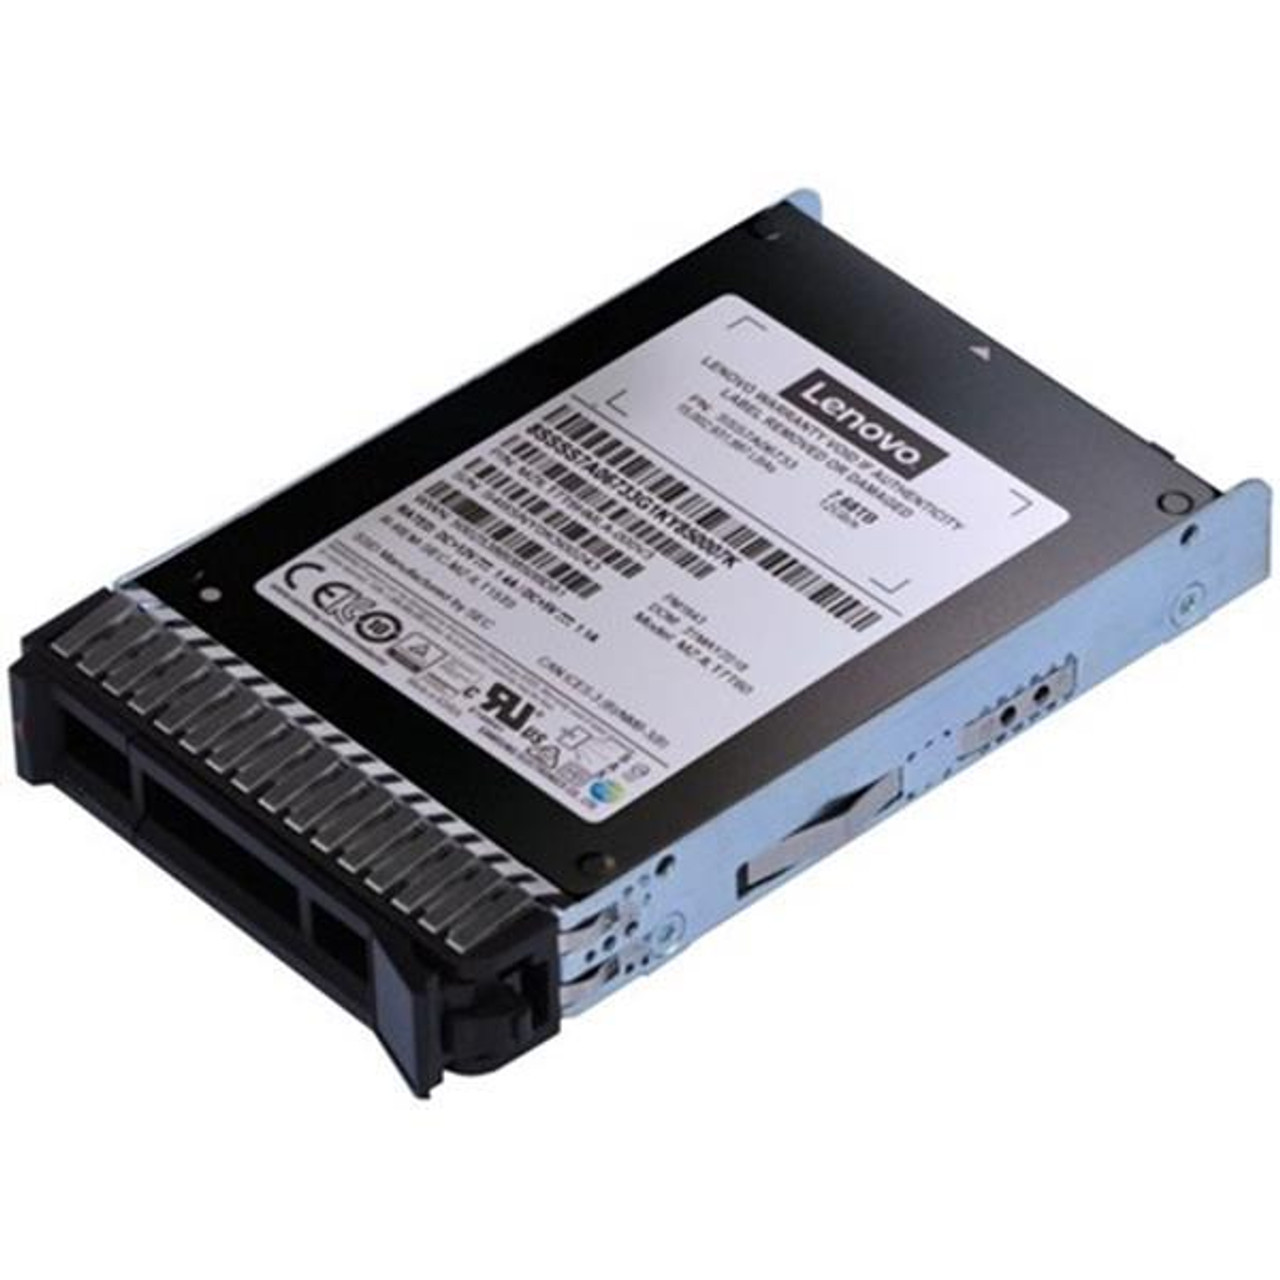 01GR777 Lenovo Enterprise 7.68TB SAS 12Gbps Hot Swap 2.5-inch Internal Solid State Drive (SSD) for NeXtScale